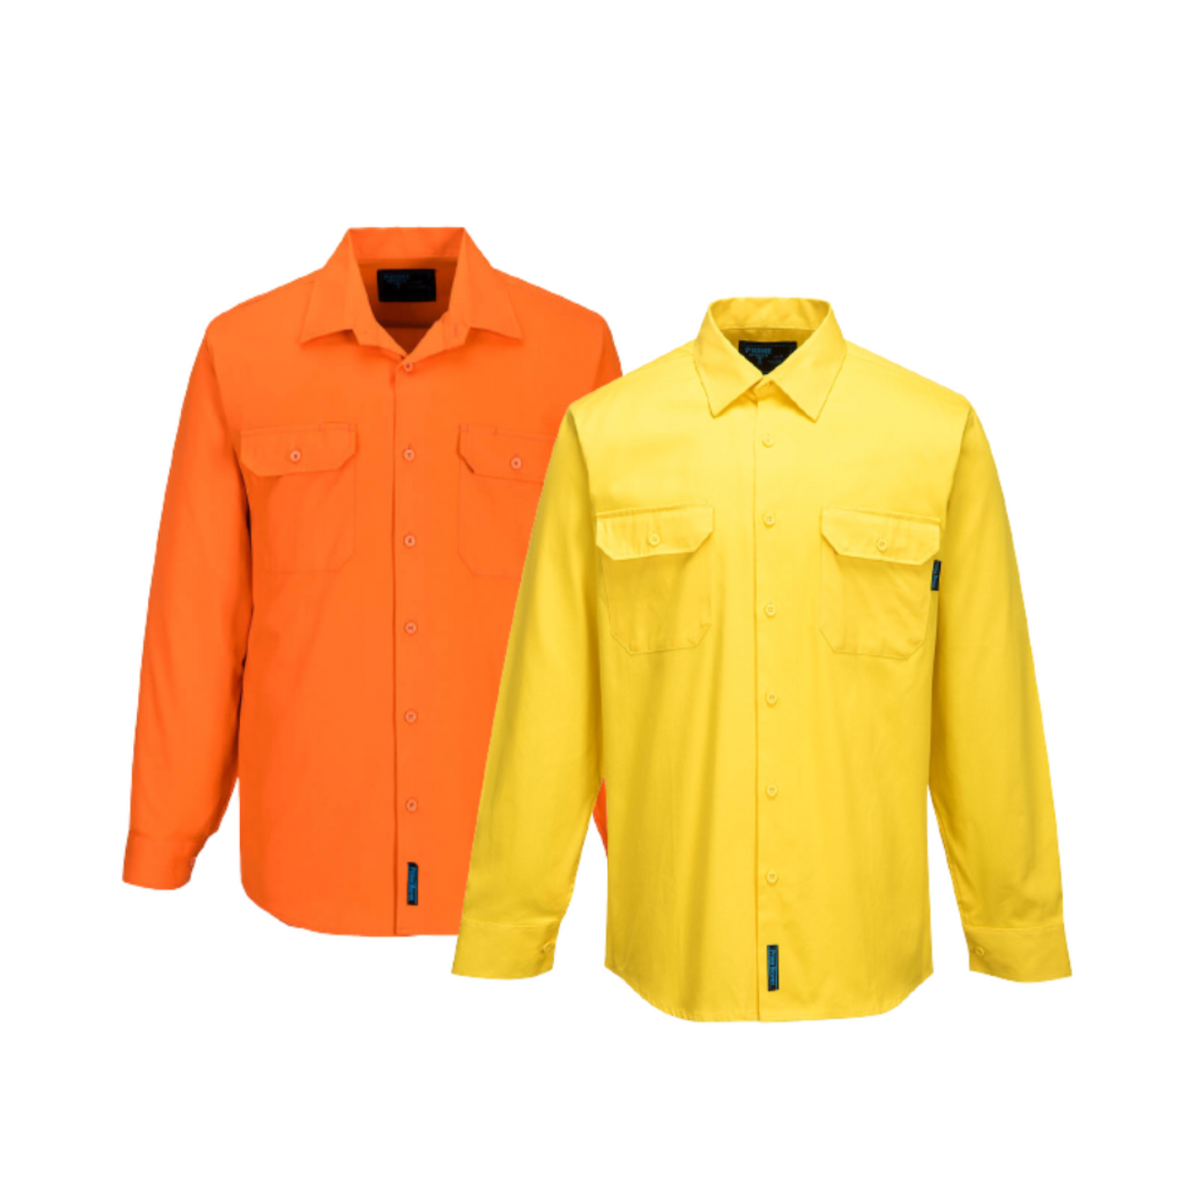 Portwest Hi-Vis Regular Weight Long Sleeve Shirt Breathable Polo Shirt MS988-Collins Clothing Co